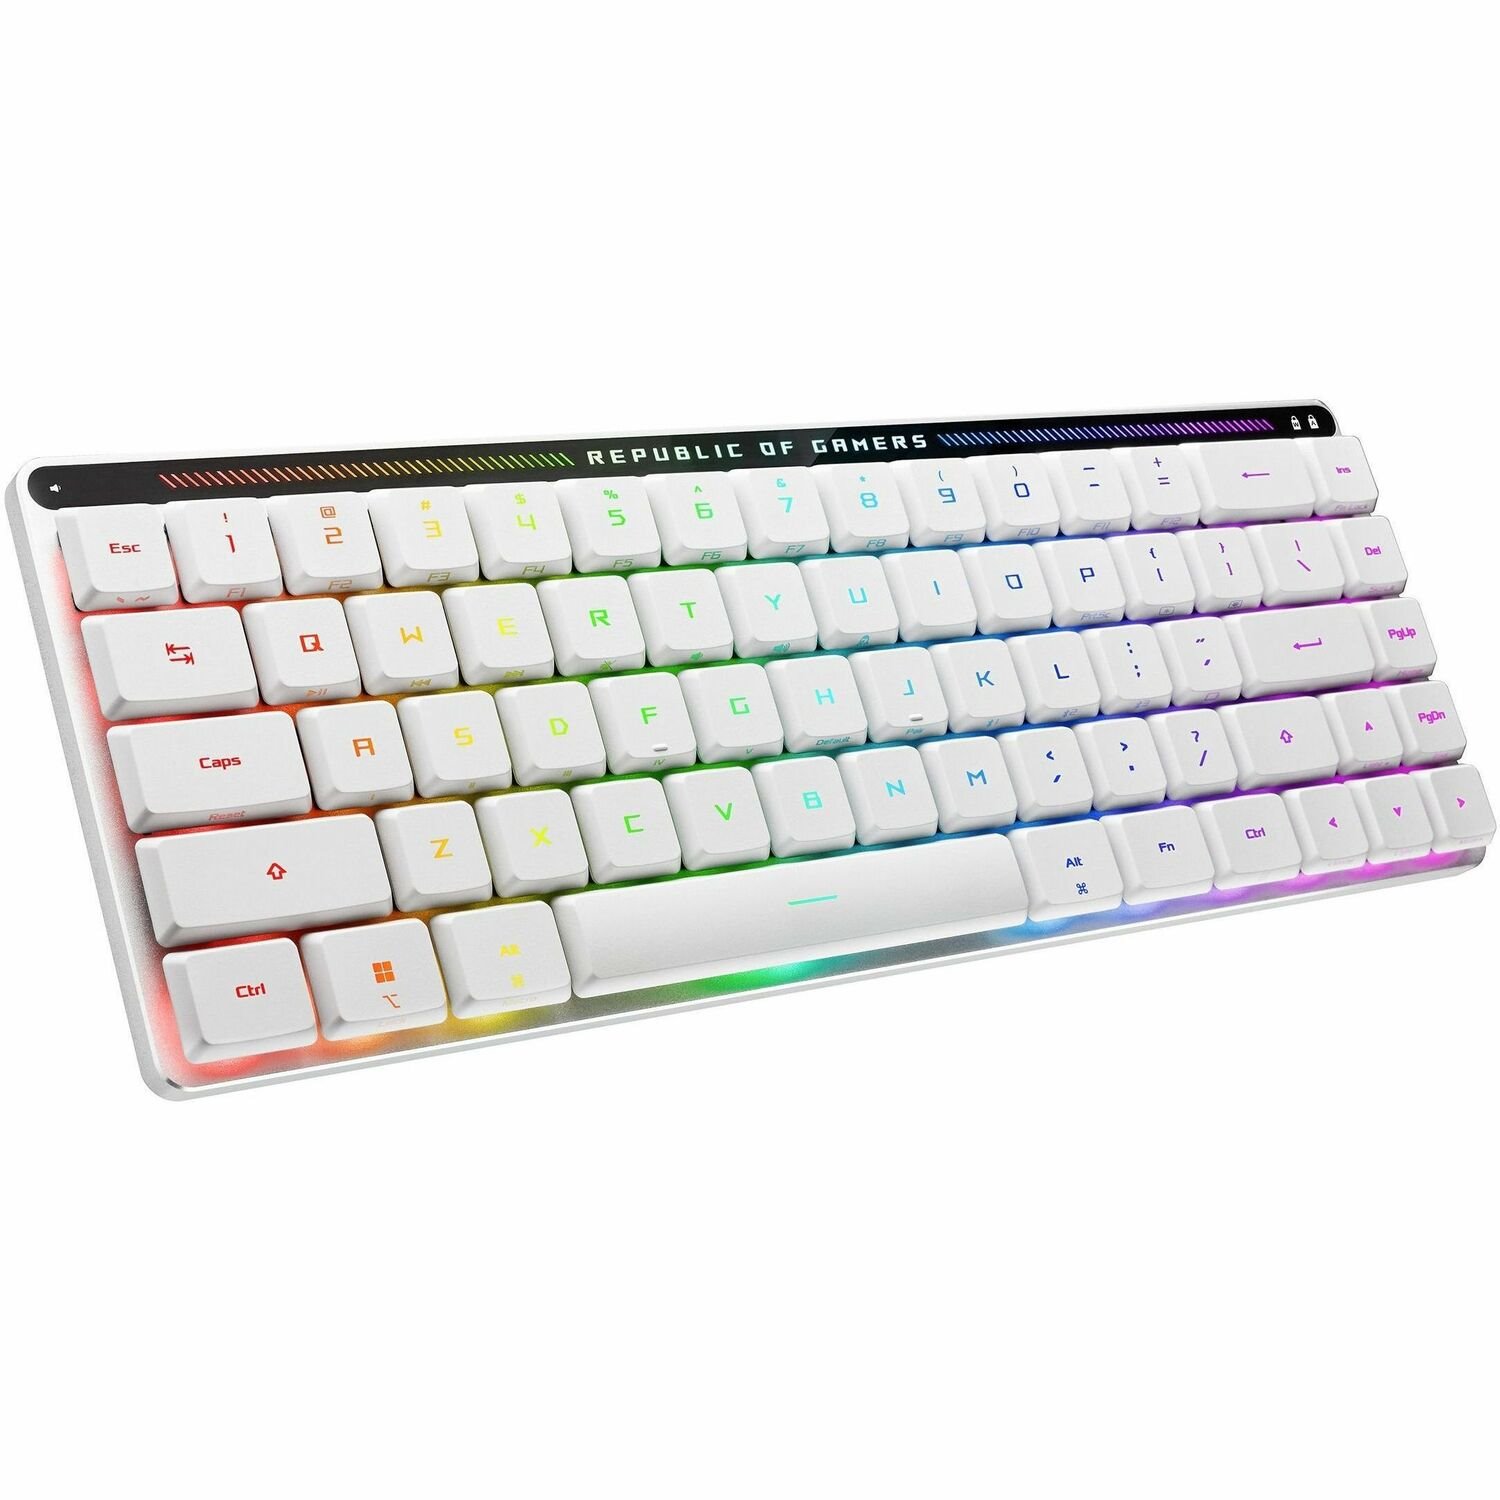 Asus ROG Falchion RX Low Profile Gaming Keyboard - Wired/Wireless Connectivity - USB 2.0 Interface - RGB LED